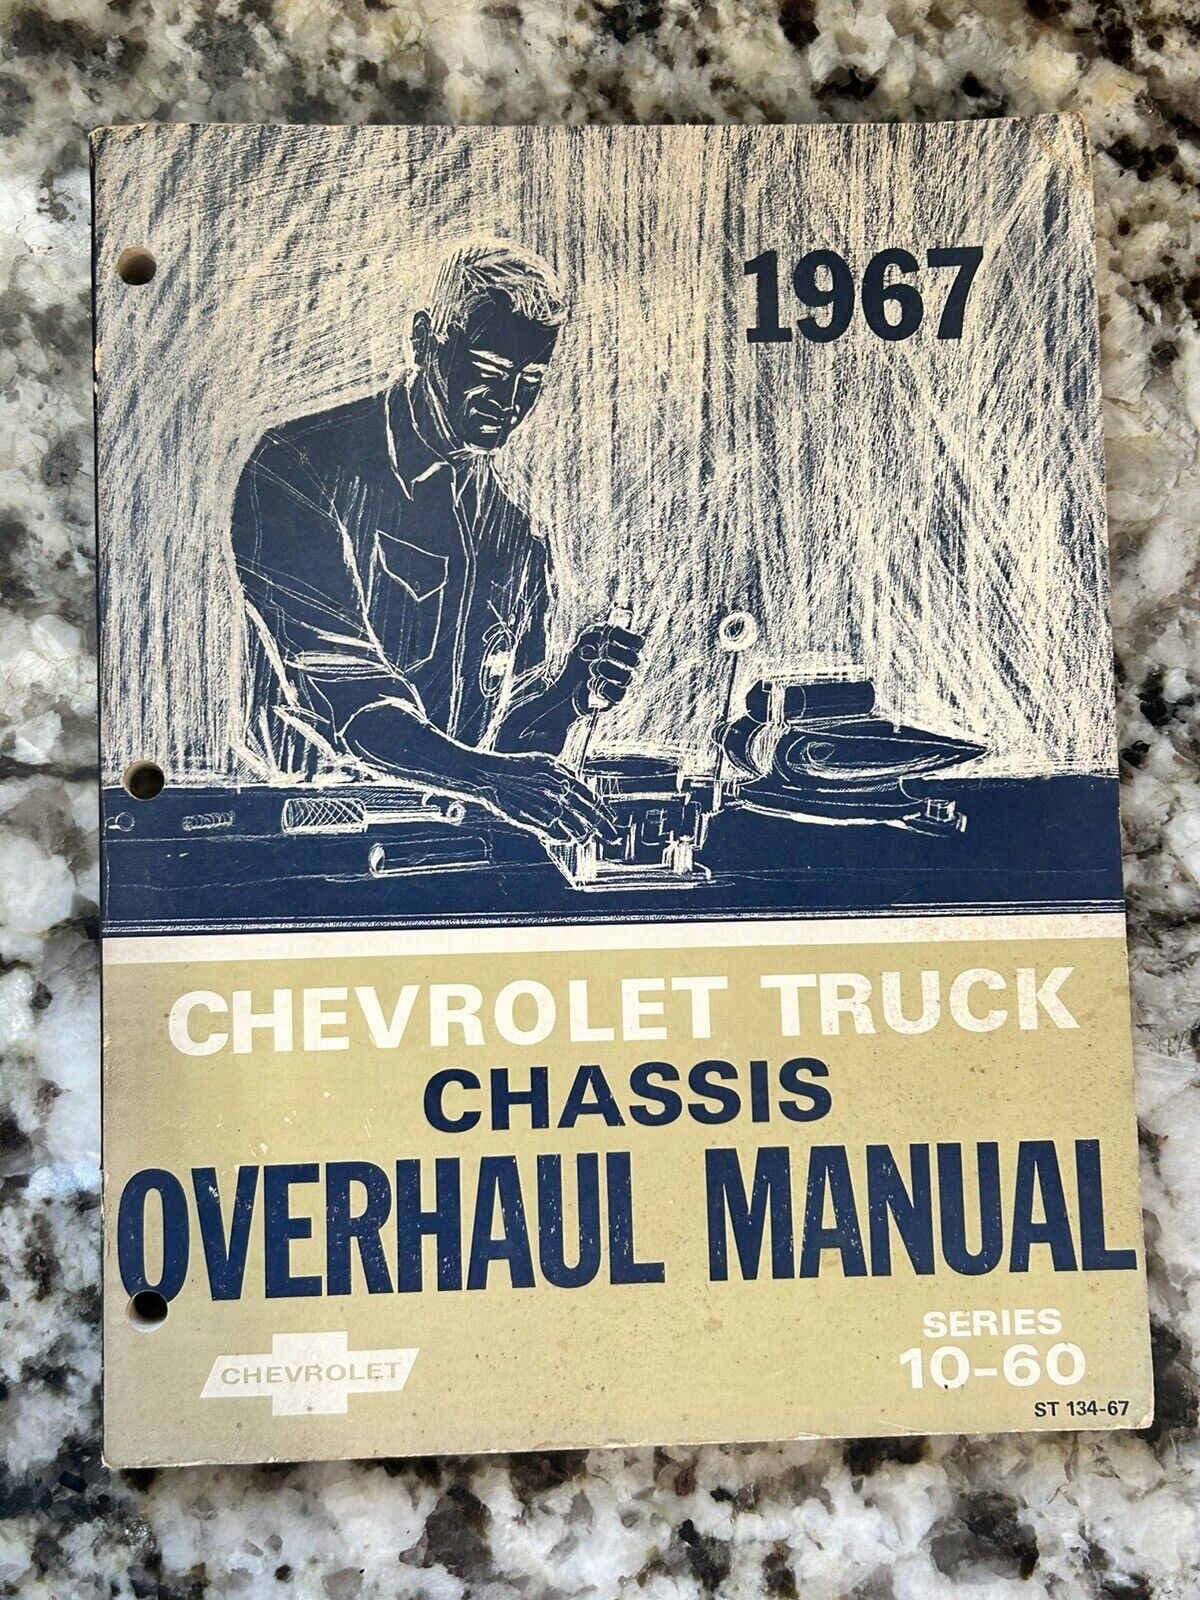 1967 Chevrolet Truck Chassis Overhaul Manual 10-60 Series